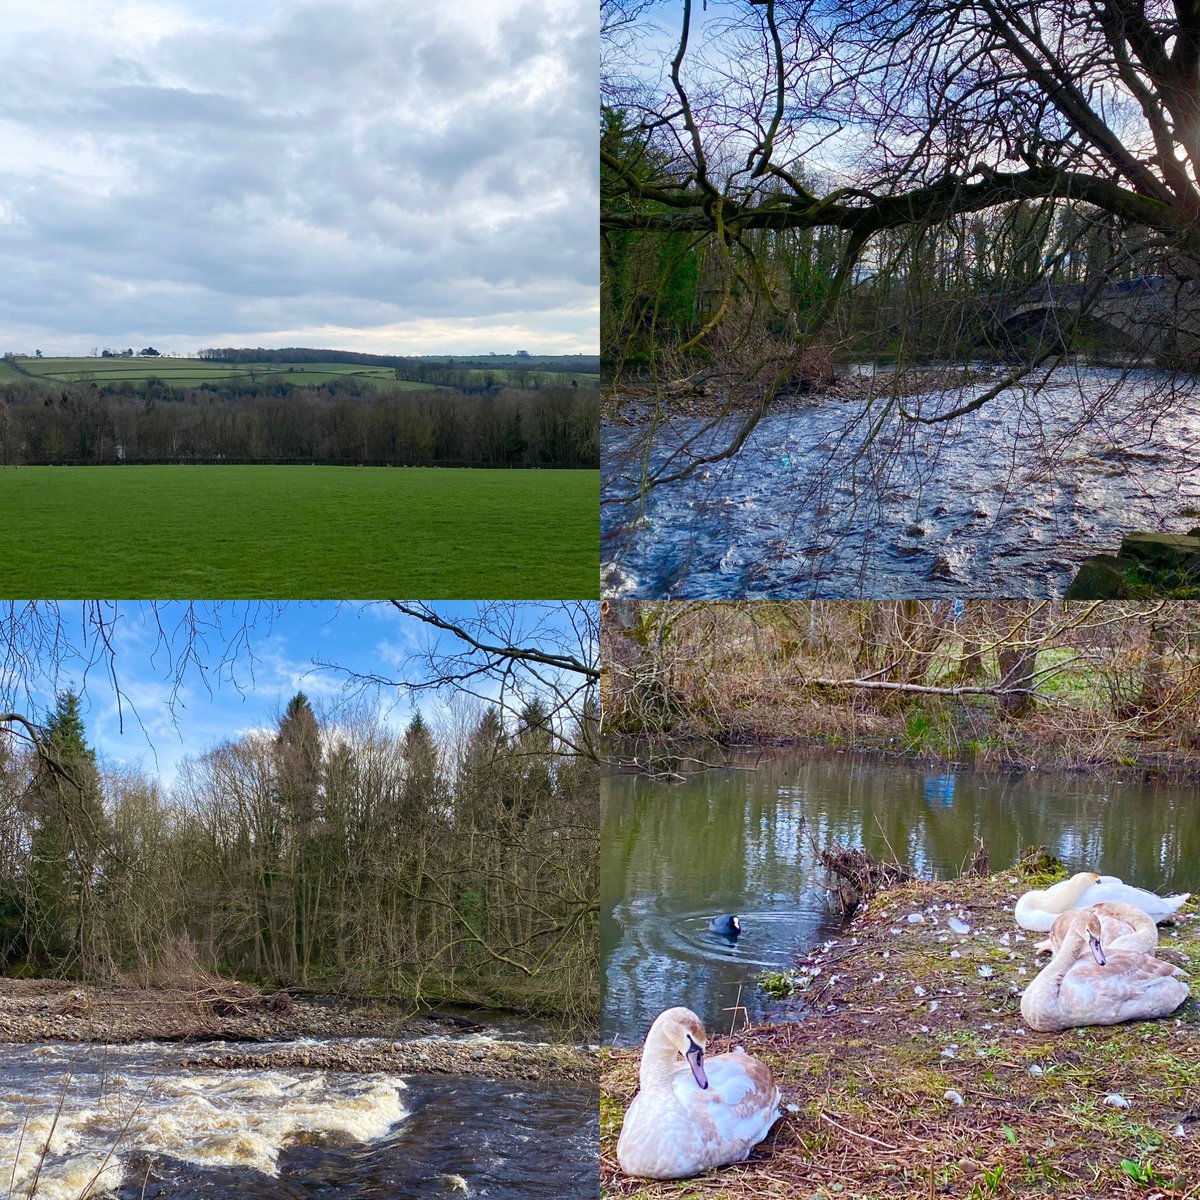 A nice long #run 🏃🏻‍♀️ this afternoon along the bank of #RiverWear, then into the @durhamwildlife nature reserve. I was also greeted by a family of swans🦢 🦢 too. #weardale #healthy #exercise @Discover_Durham